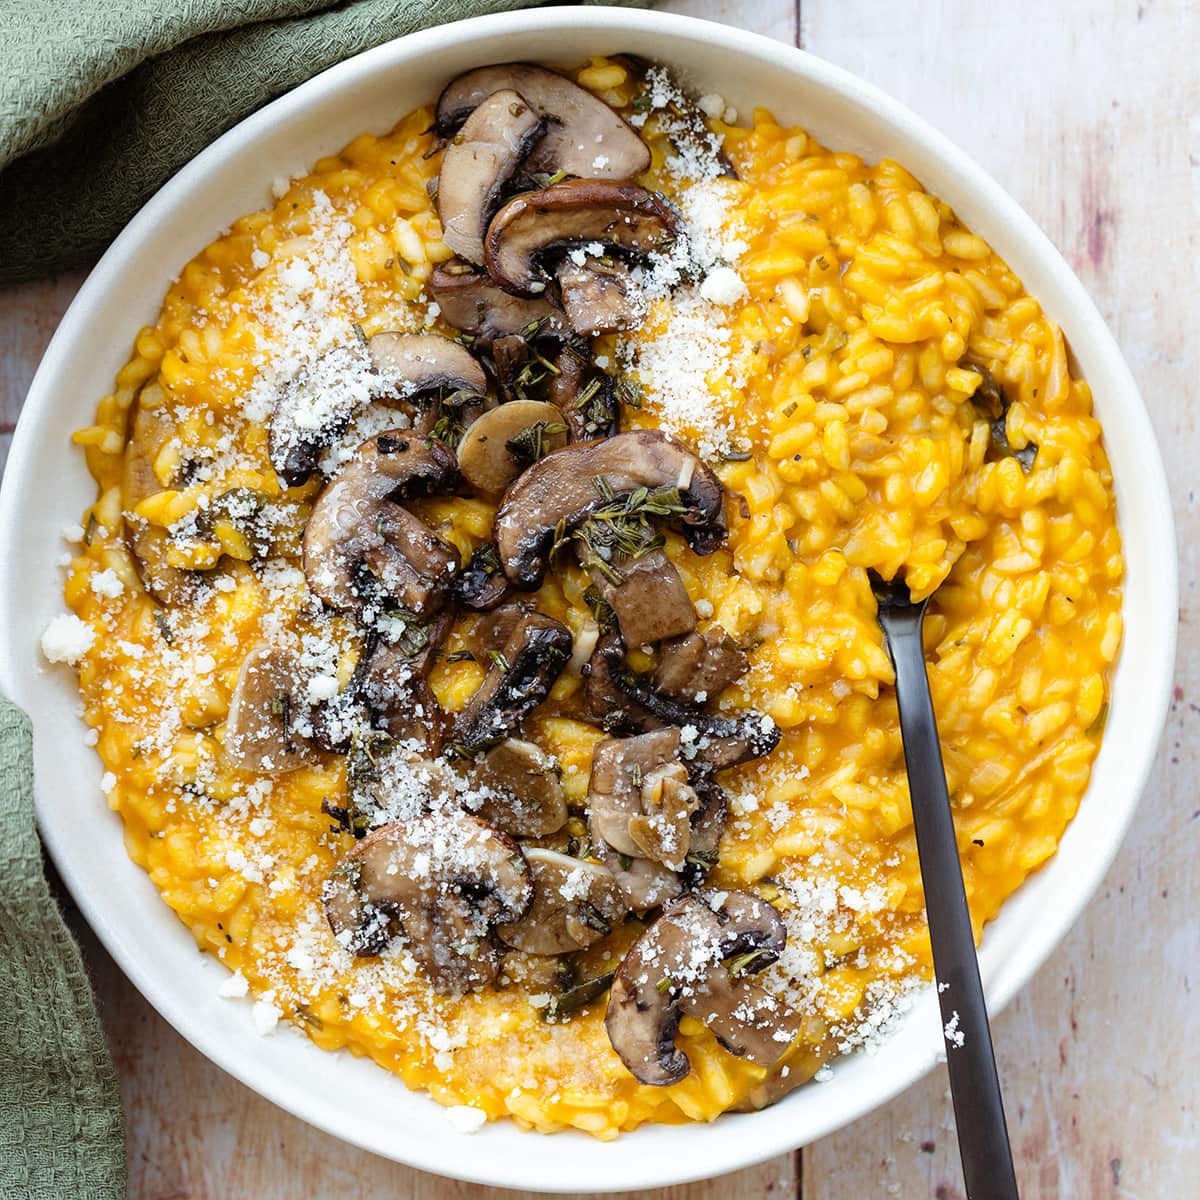 Pumpkin risotto topped with sauteed mushroom in a white plate on a light wooden background.